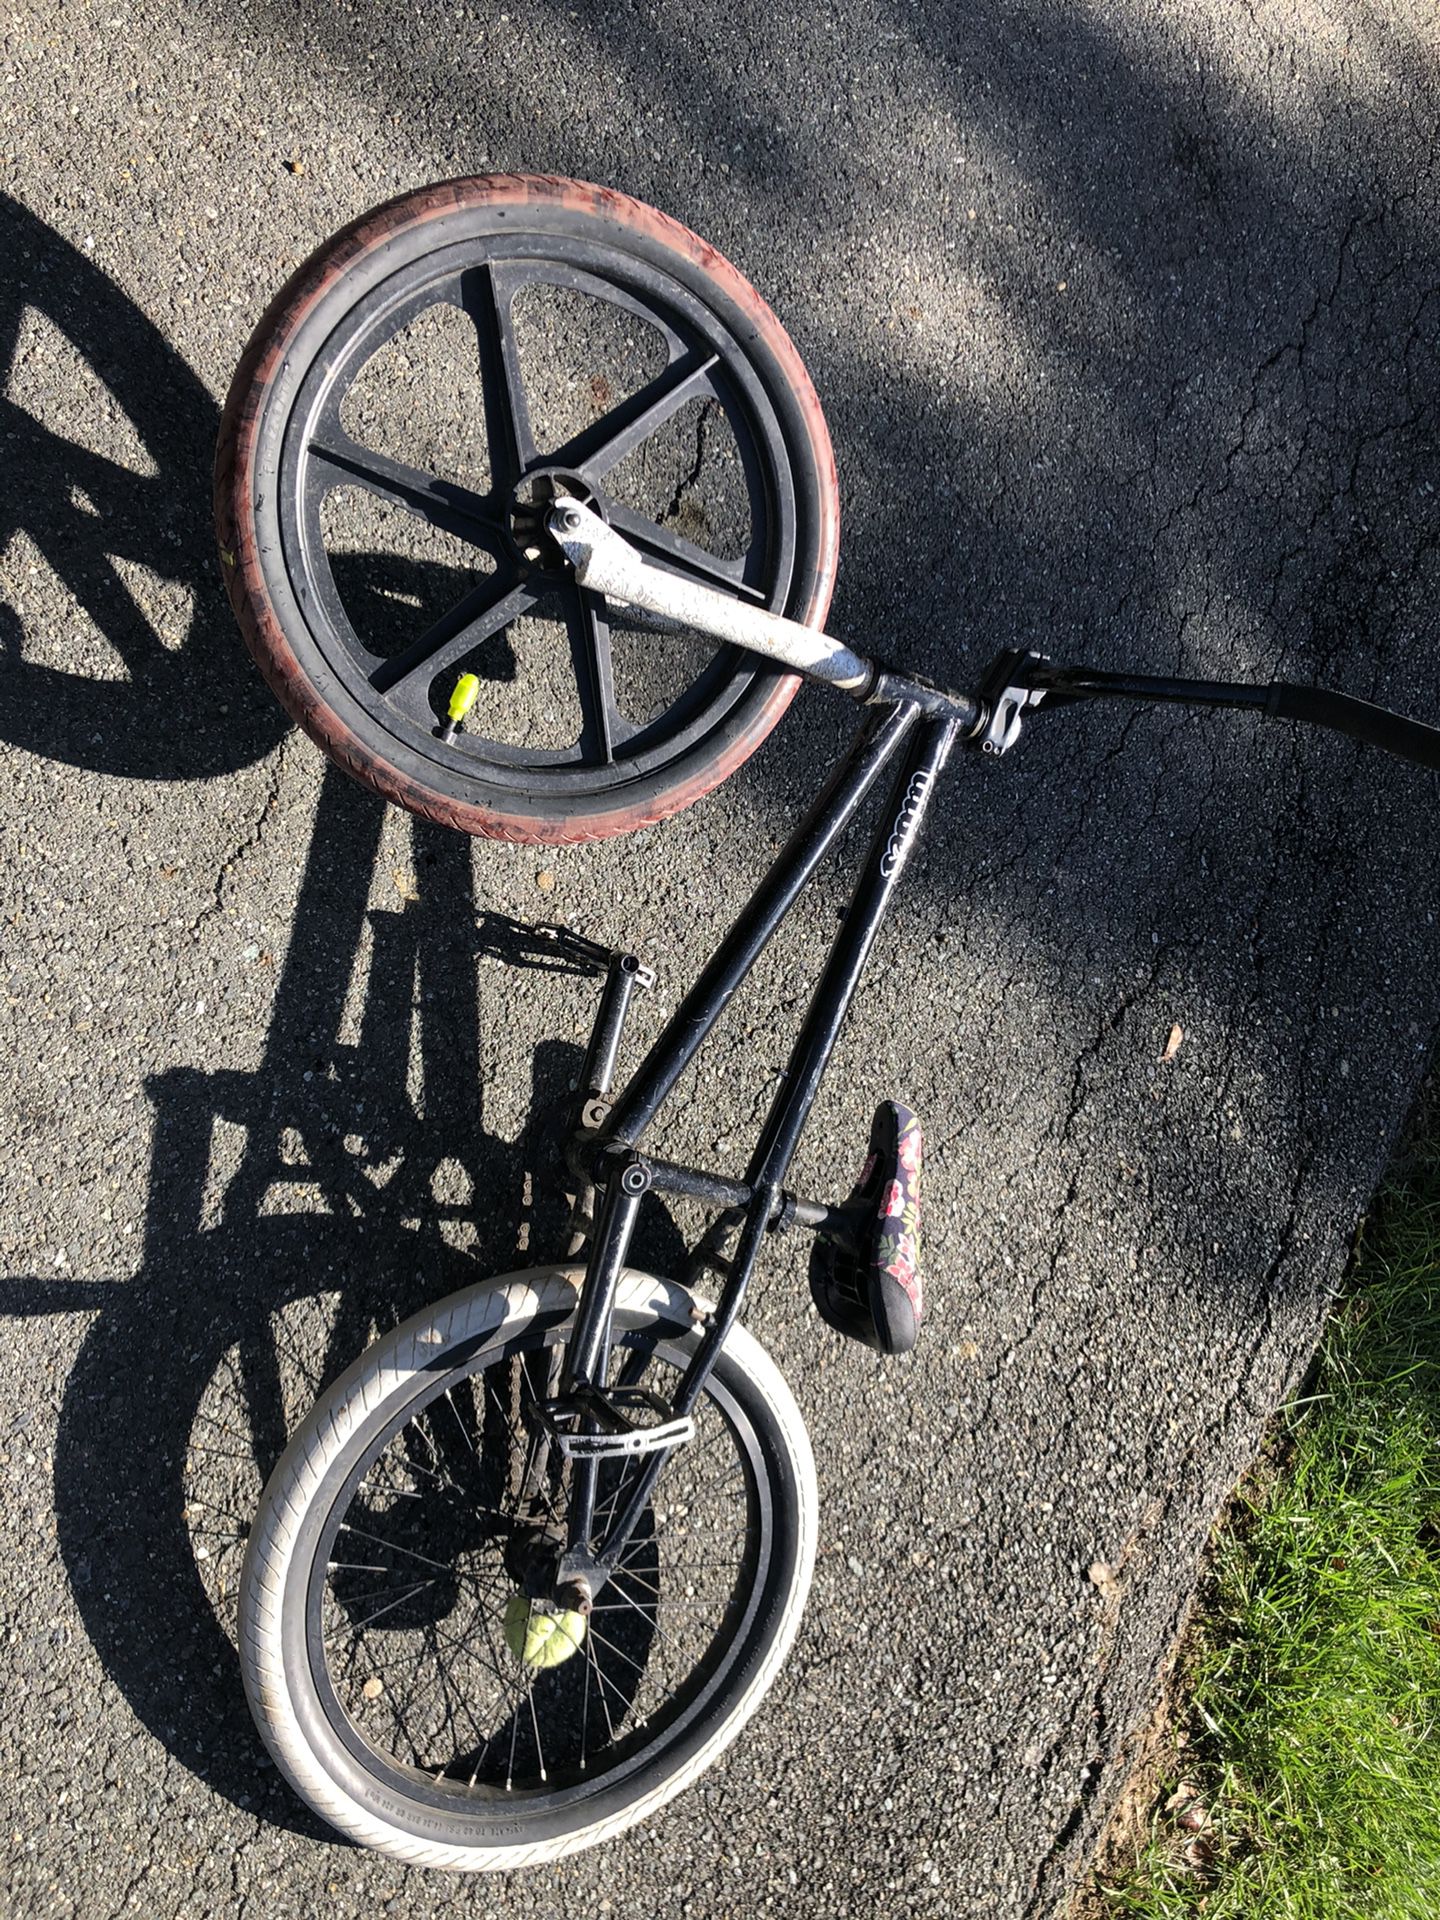 BMX FREESTYLE BIKE NO BRAKES (meant for tricks) custom built I want it out of the house no need for it anymore. Works perfectly fine just chains a li